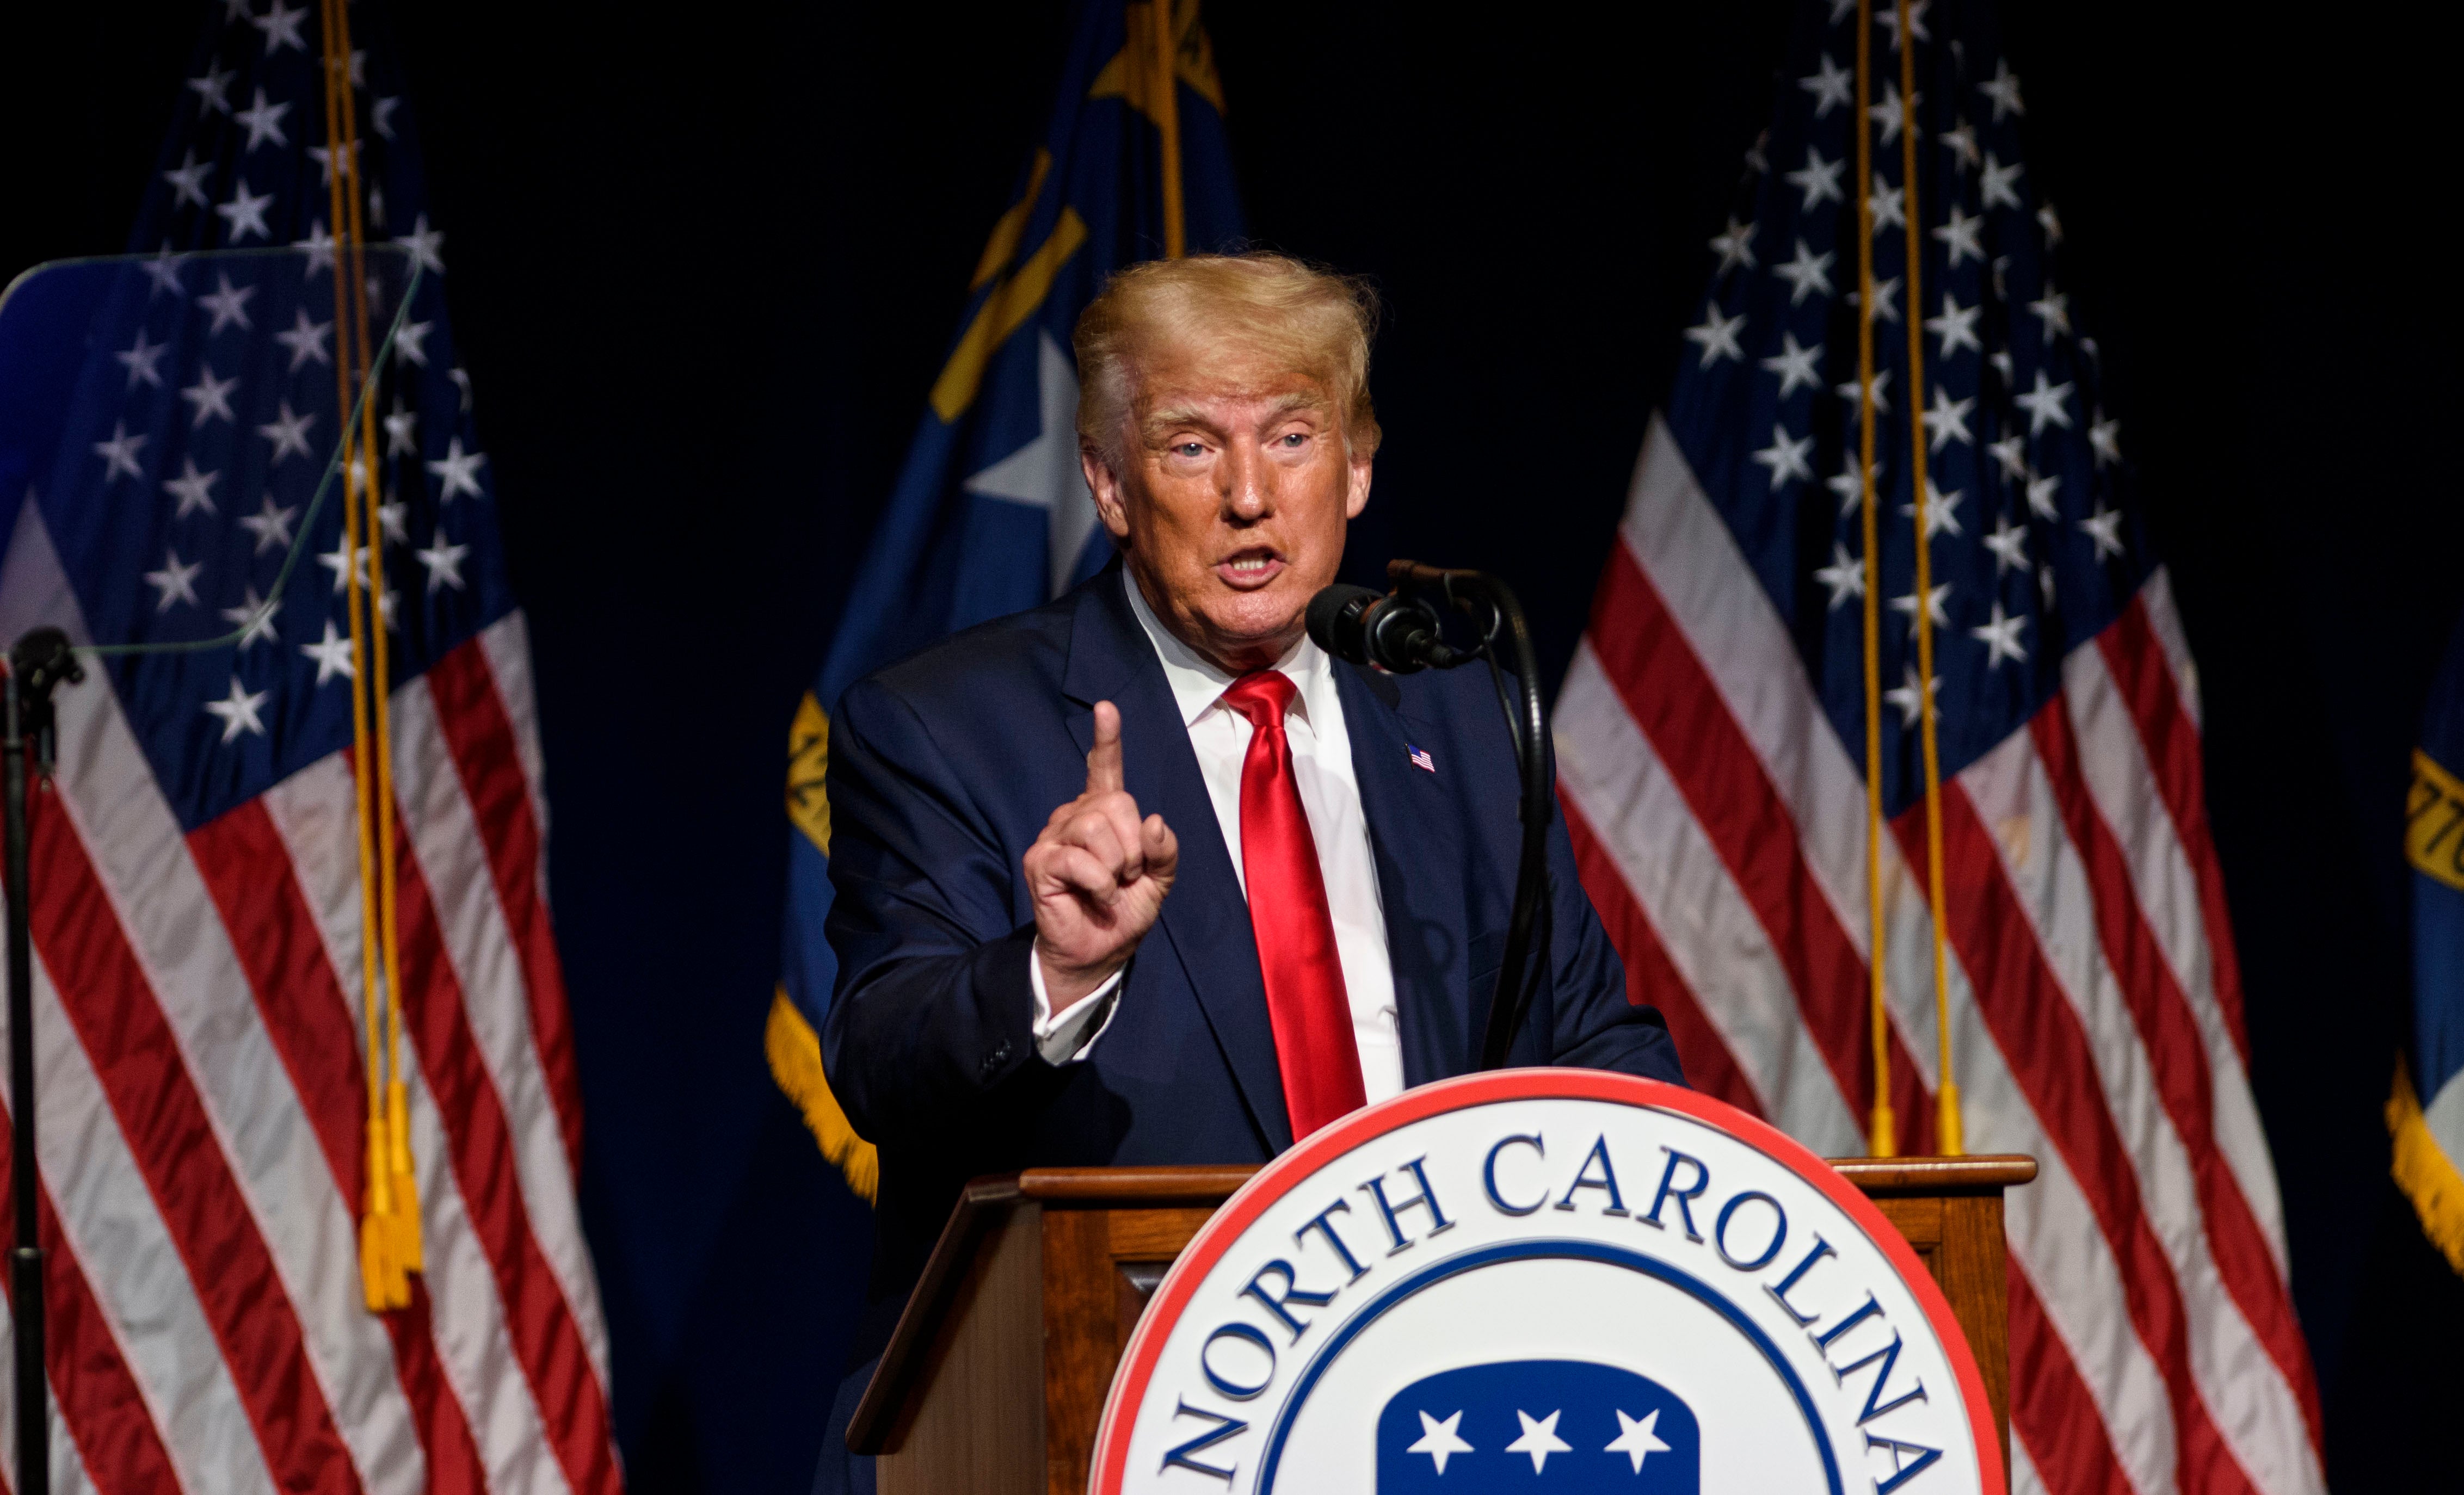 Former US President Donald Trump addresses the NCGOP state convention on 5 June, 2021 in Greenville, North Carolina. The House could soon vote to overturn three Trump-era rules.